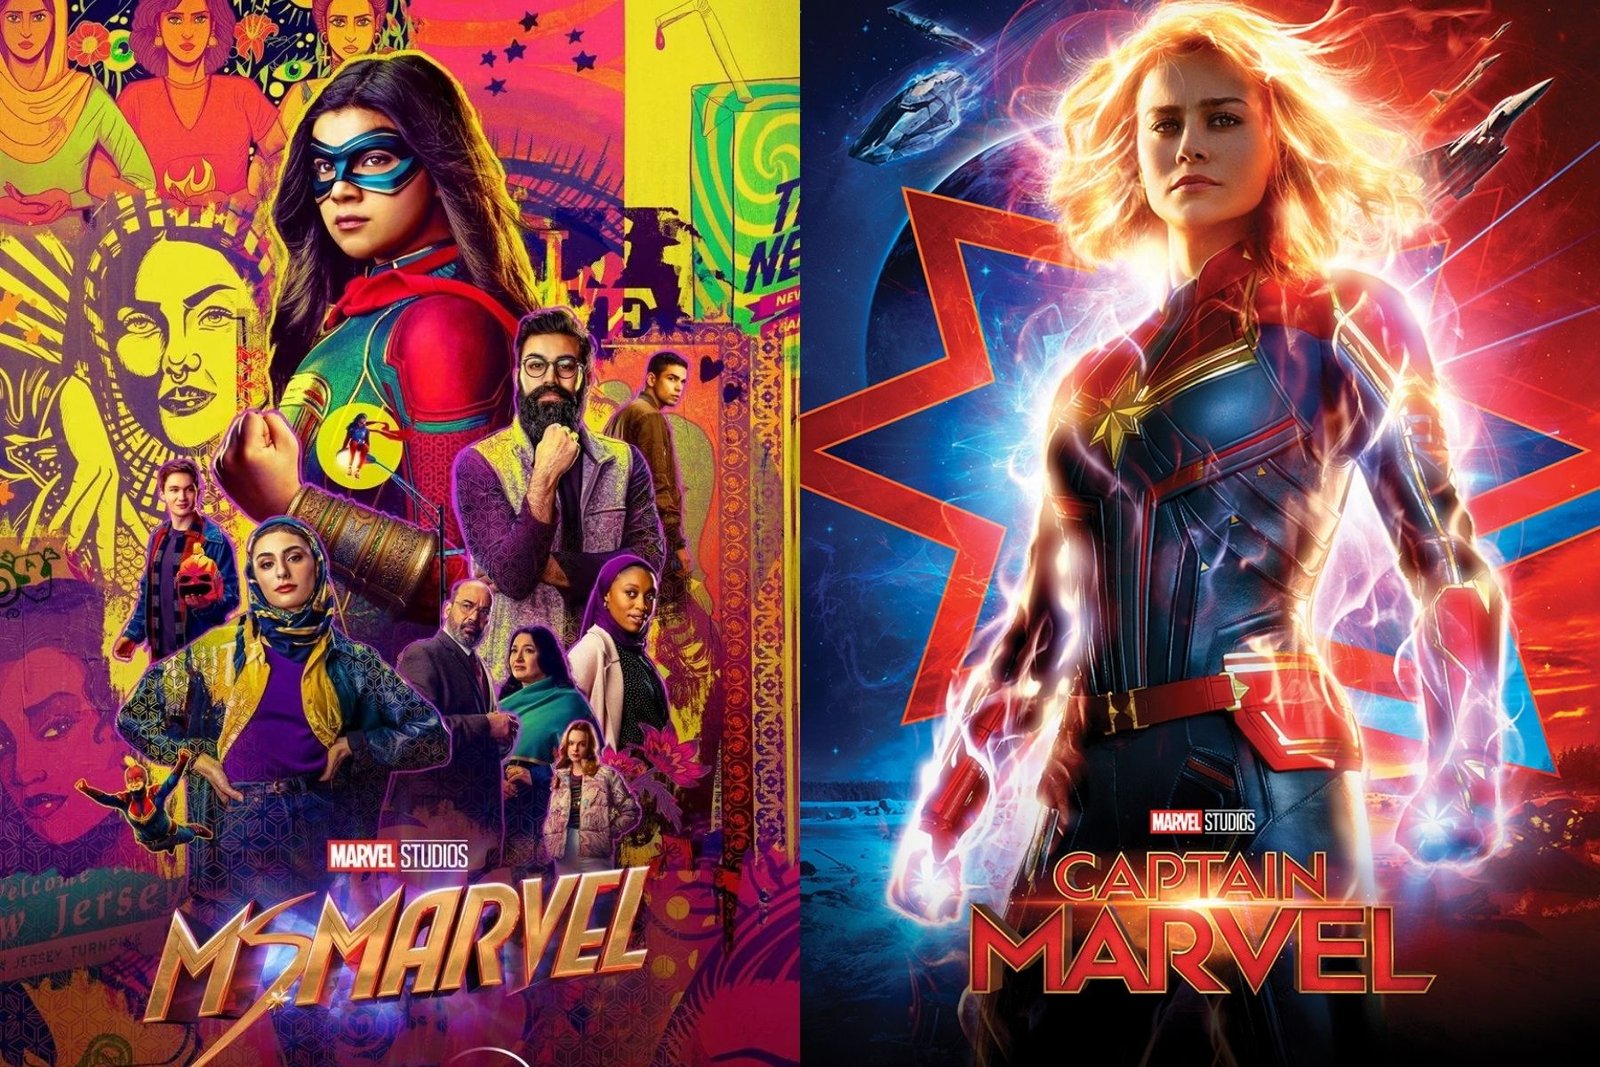 Is Ms. Marvel and Captain Marvel the same?